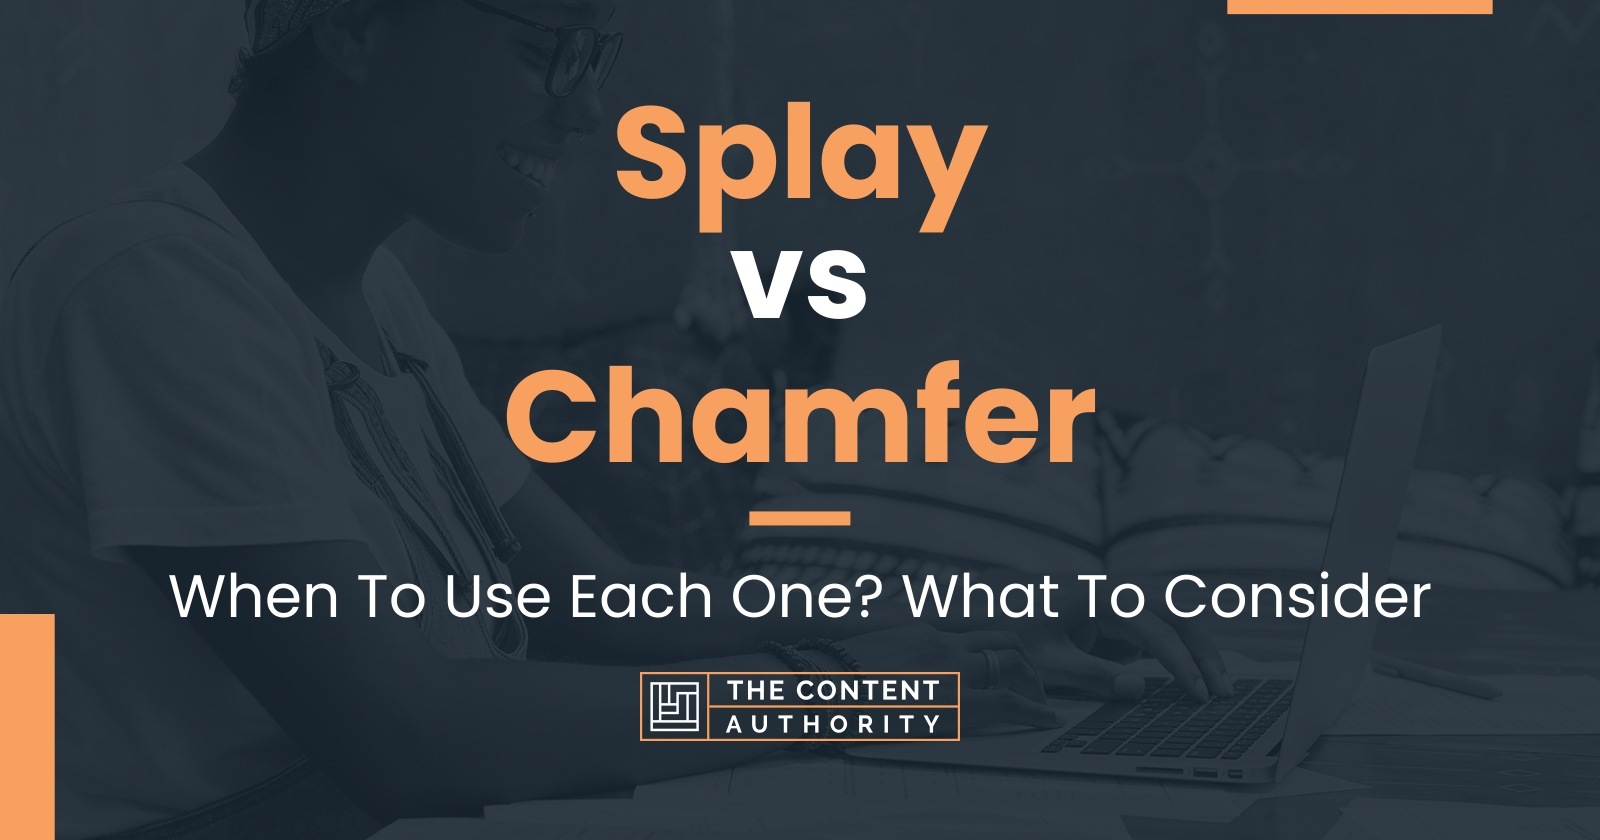 Splay vs Chamfer: When To Use Each One? What To Consider